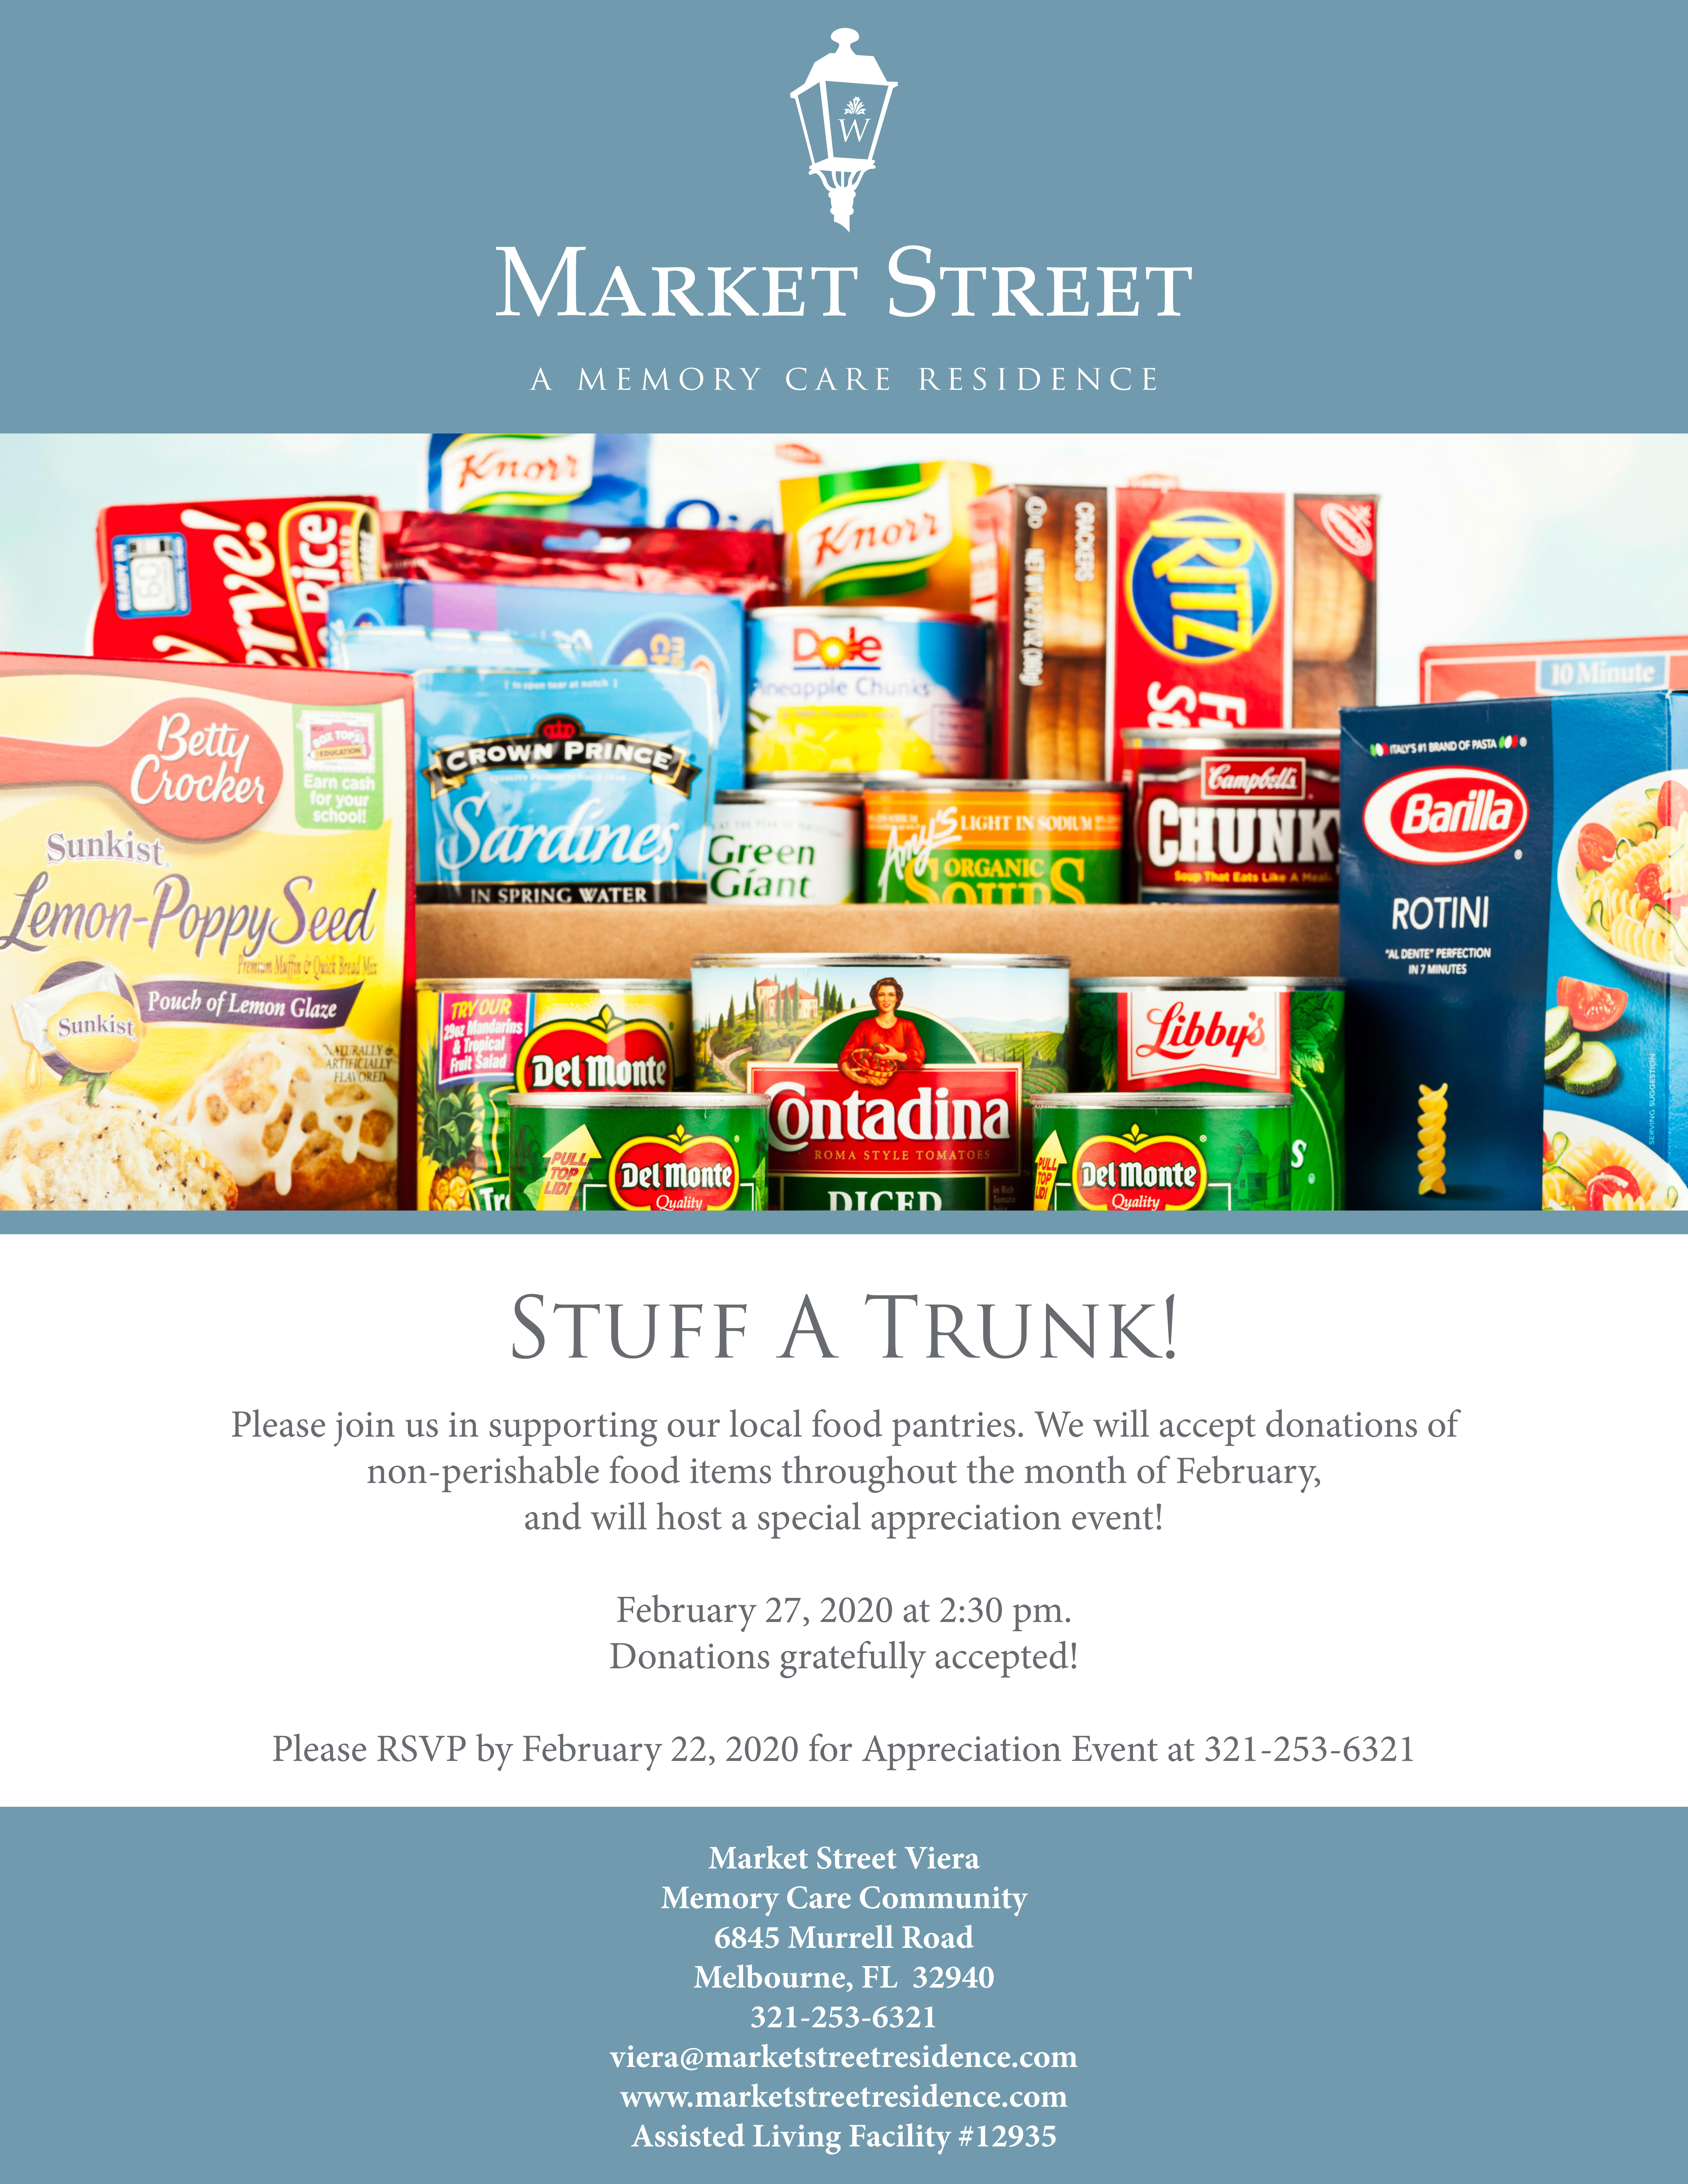 Stuff a Trunk! hosted by Market Street